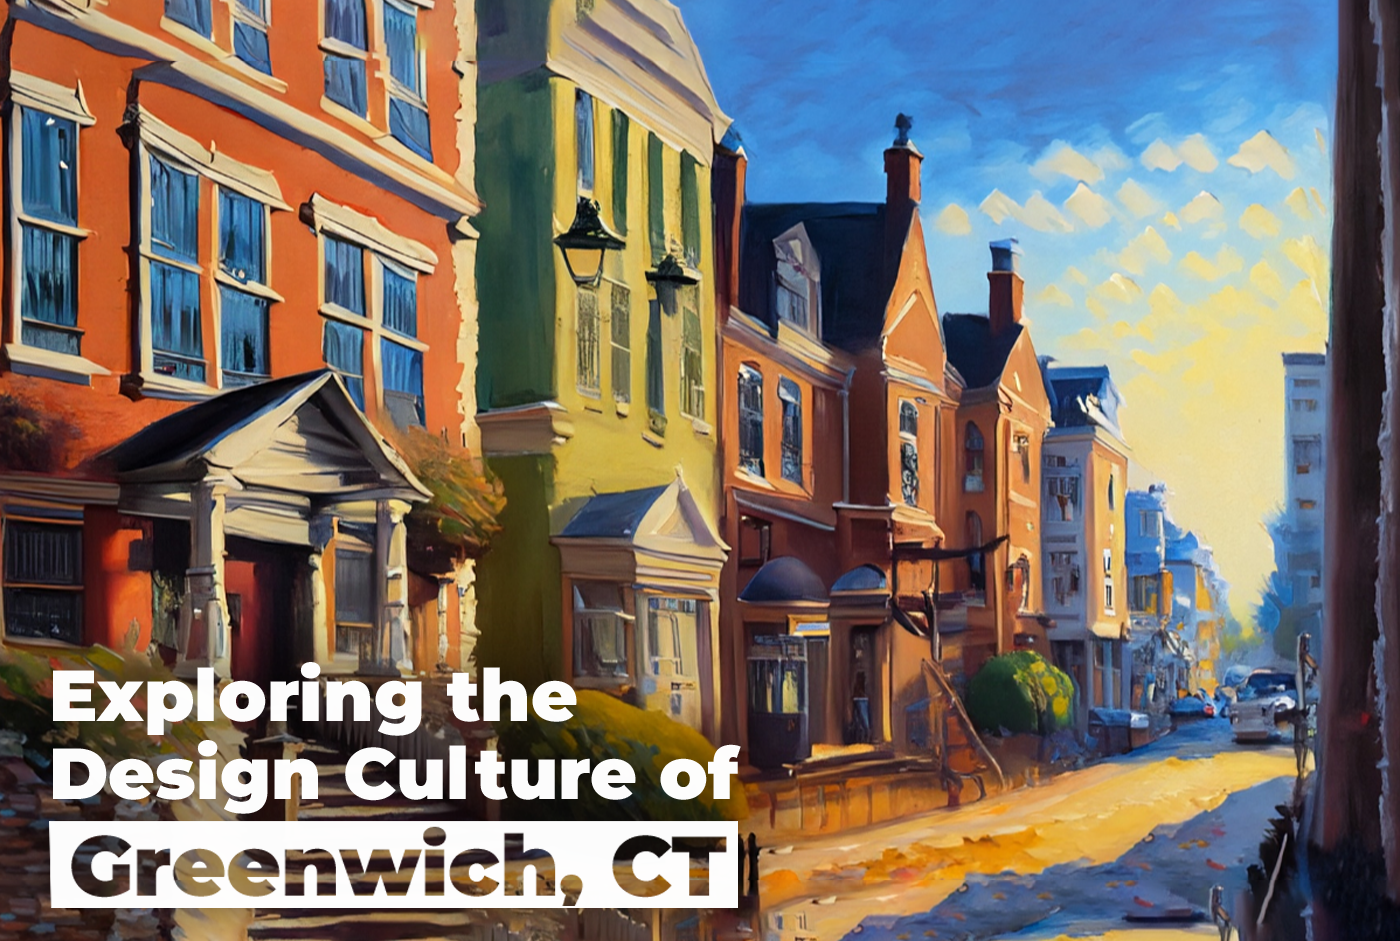 Oil painted image of downtown Greenwich, CT focusing on architectural design